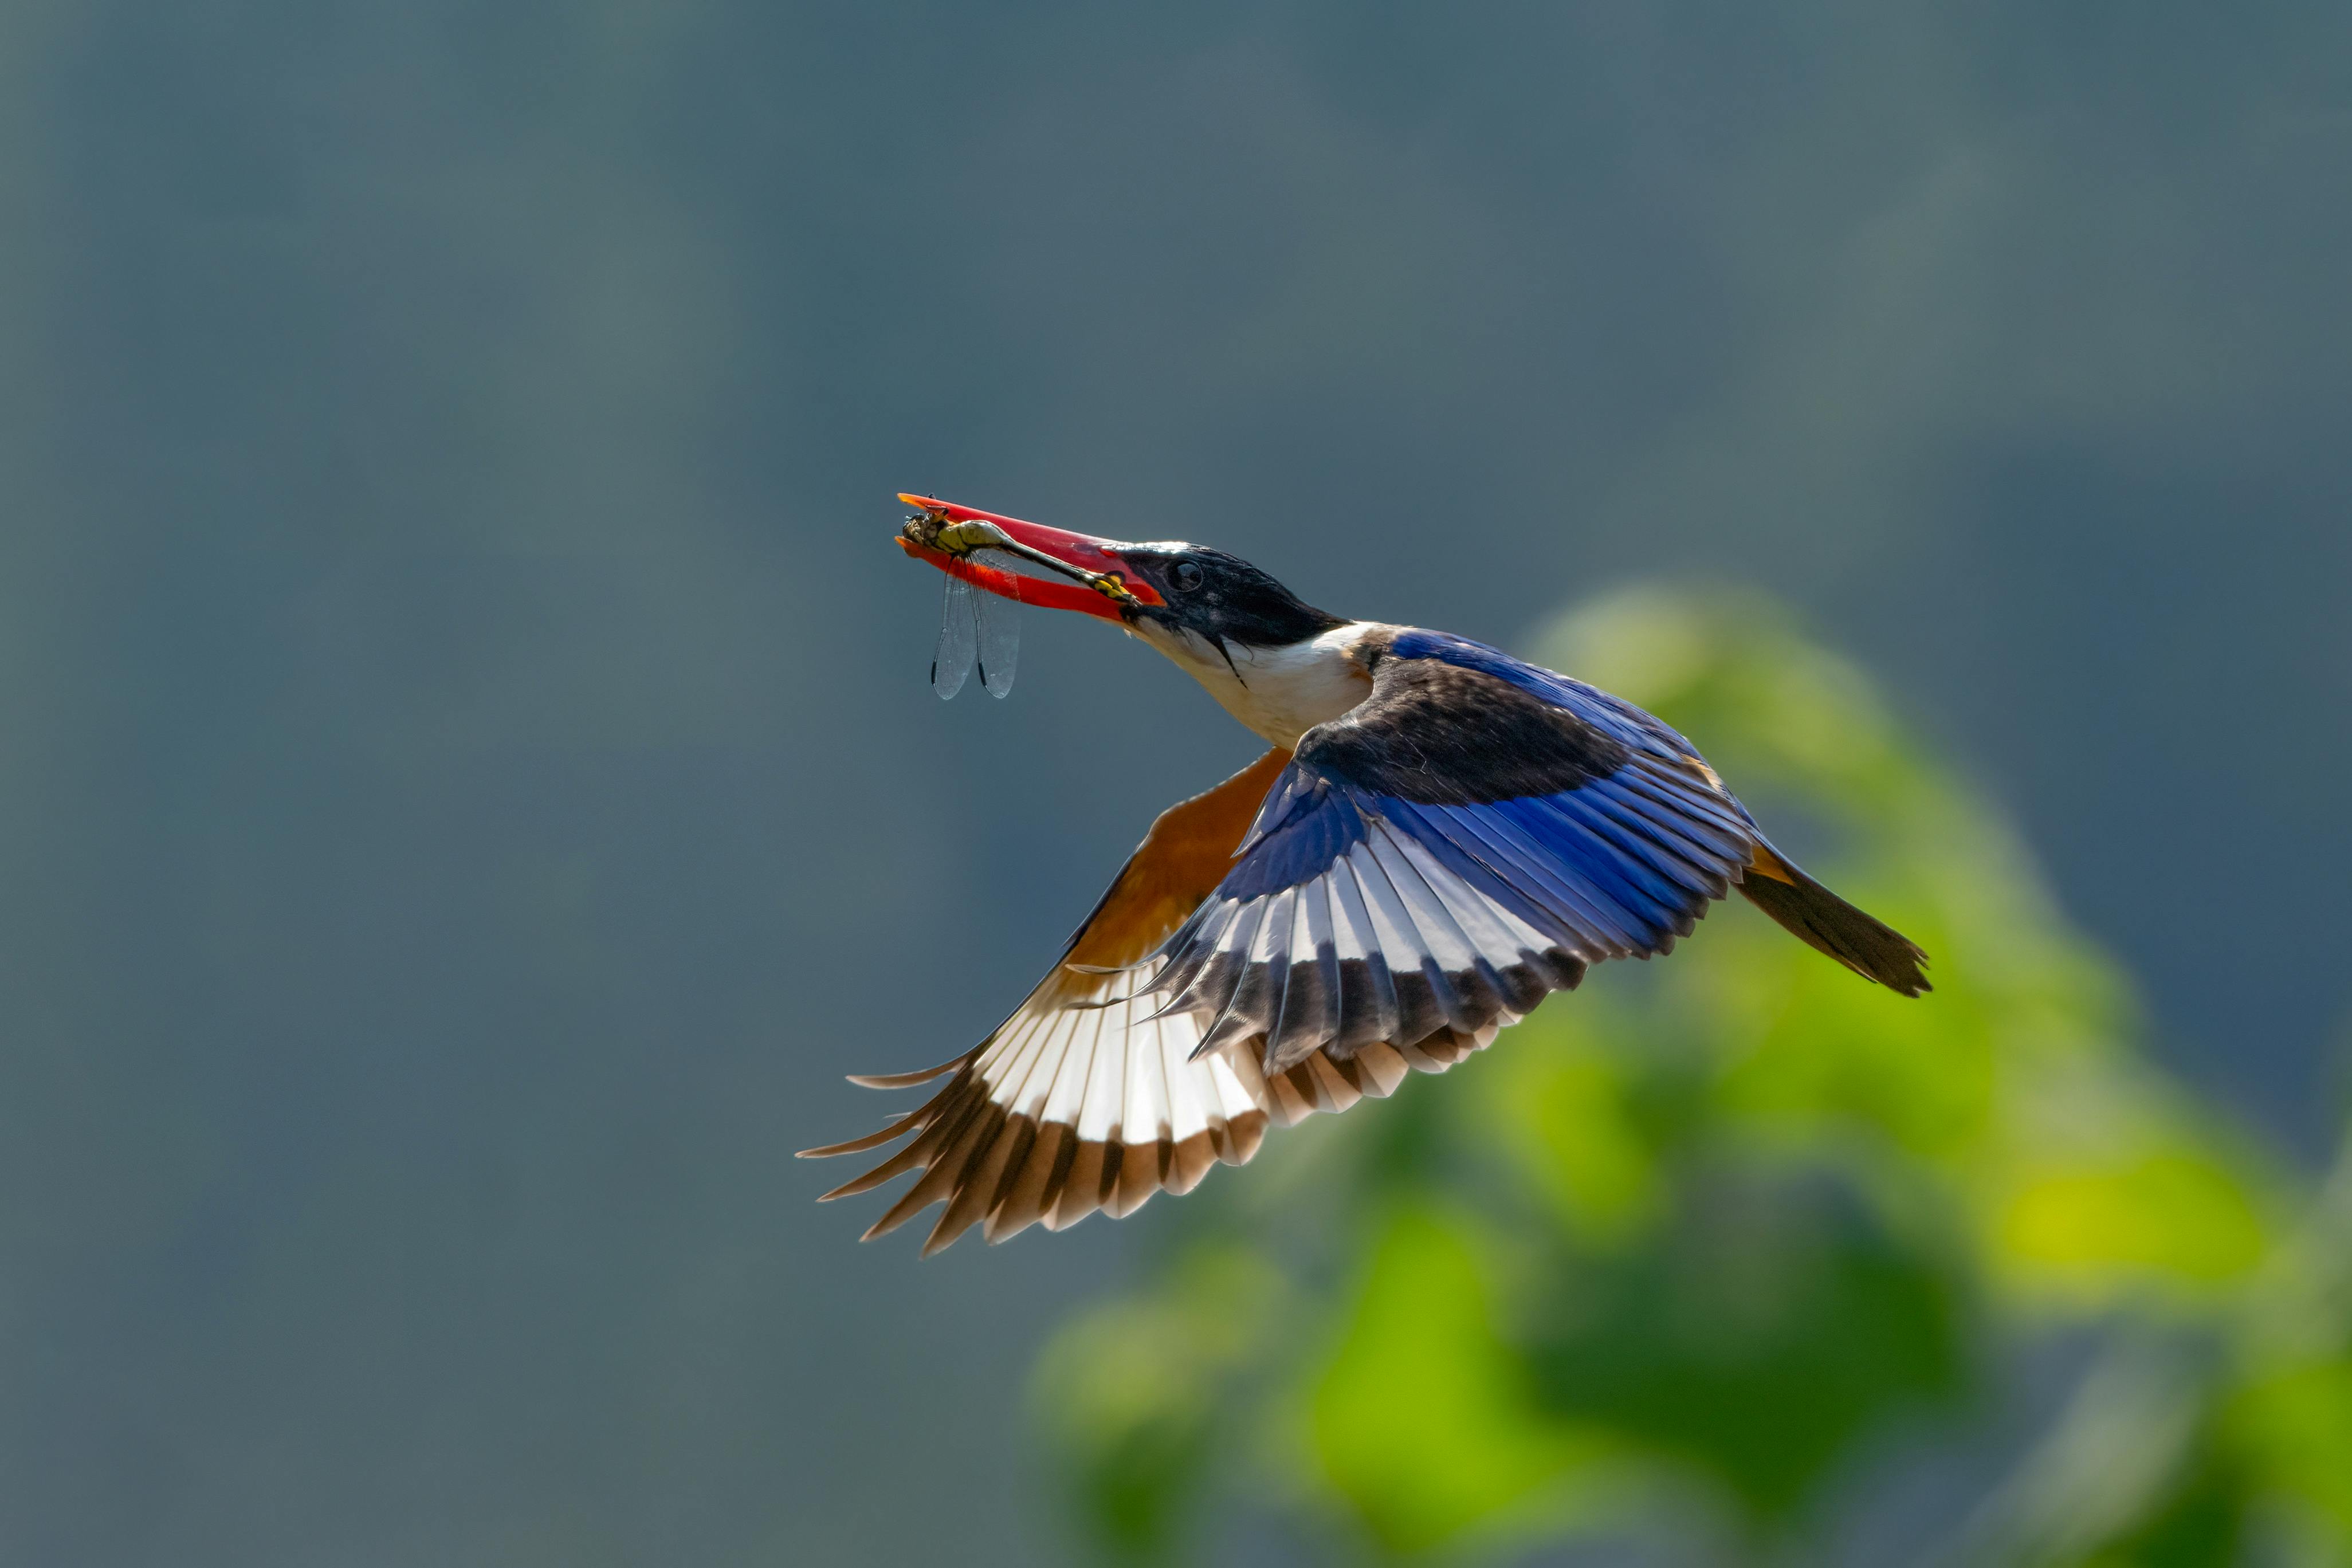 The Kingfisher with a Dragonfly